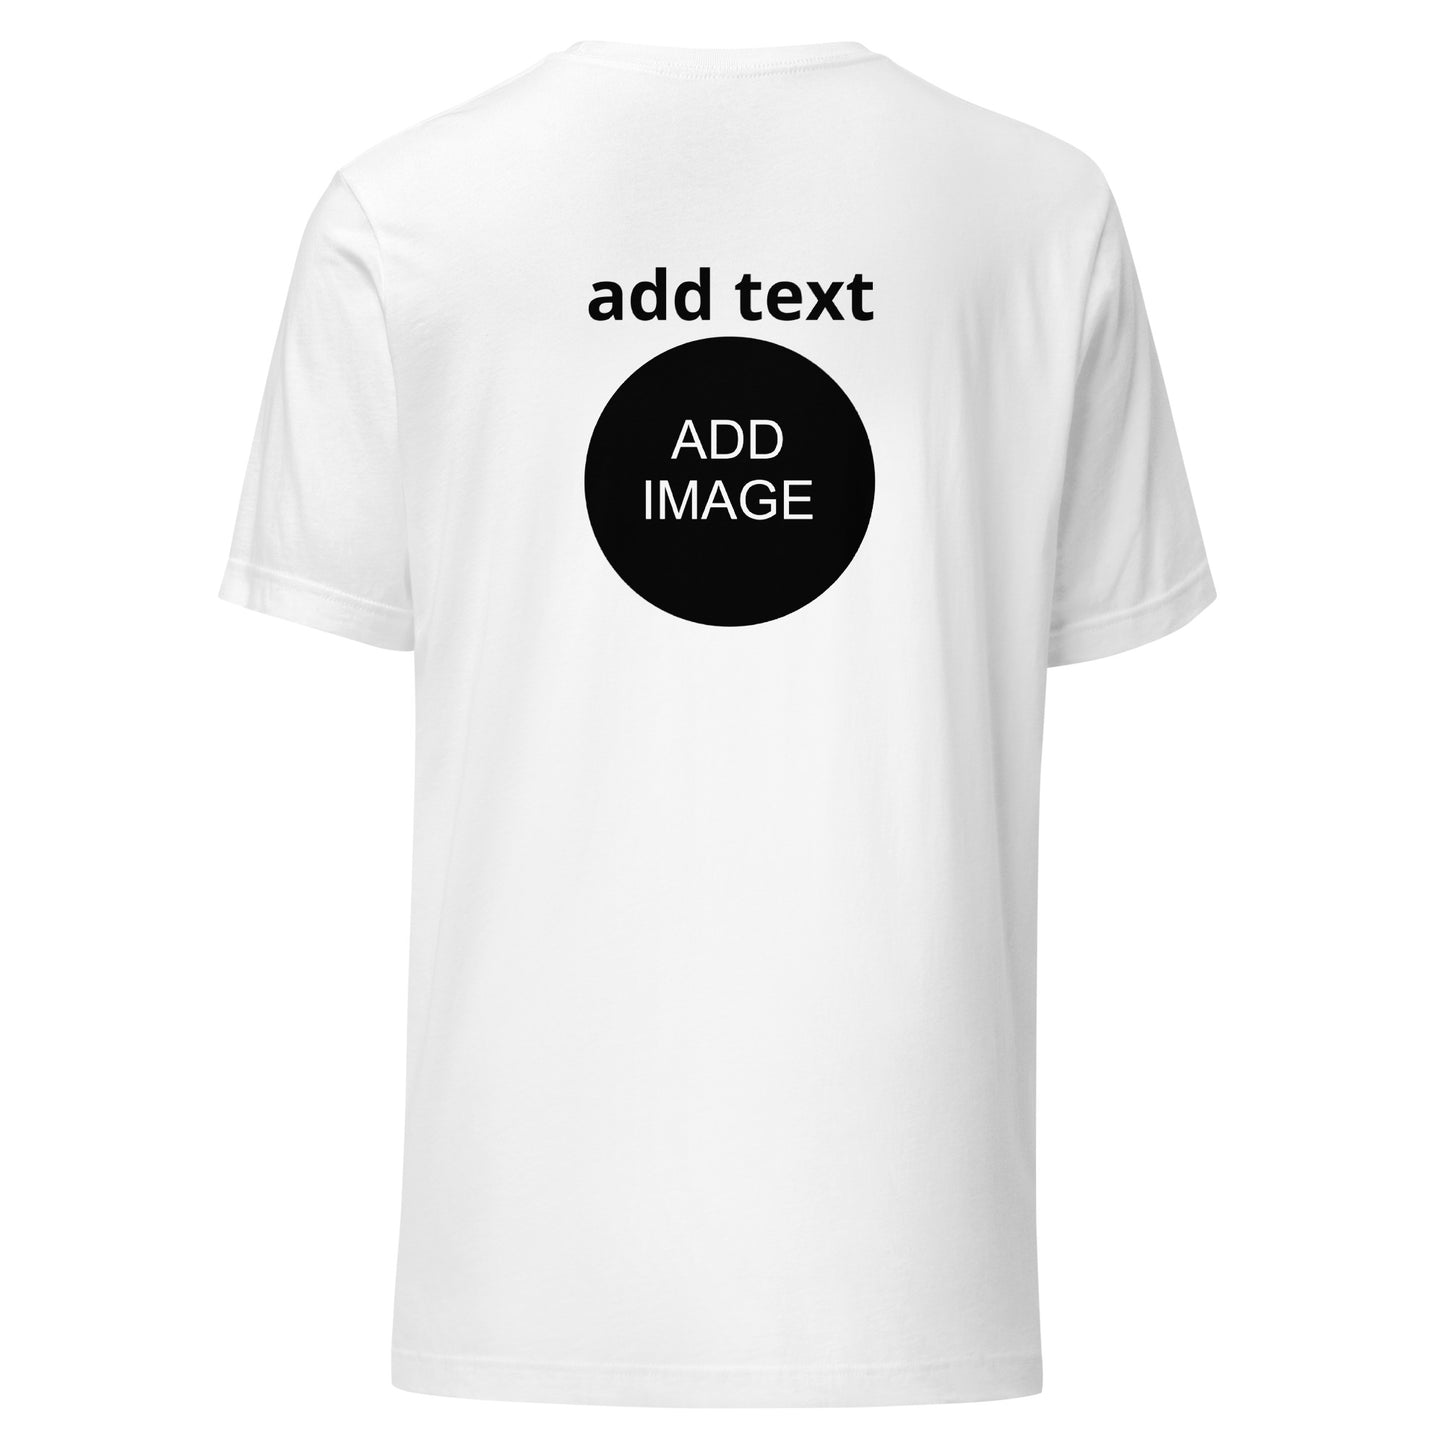 Small - Medium Unisex [front & back image with top black text]